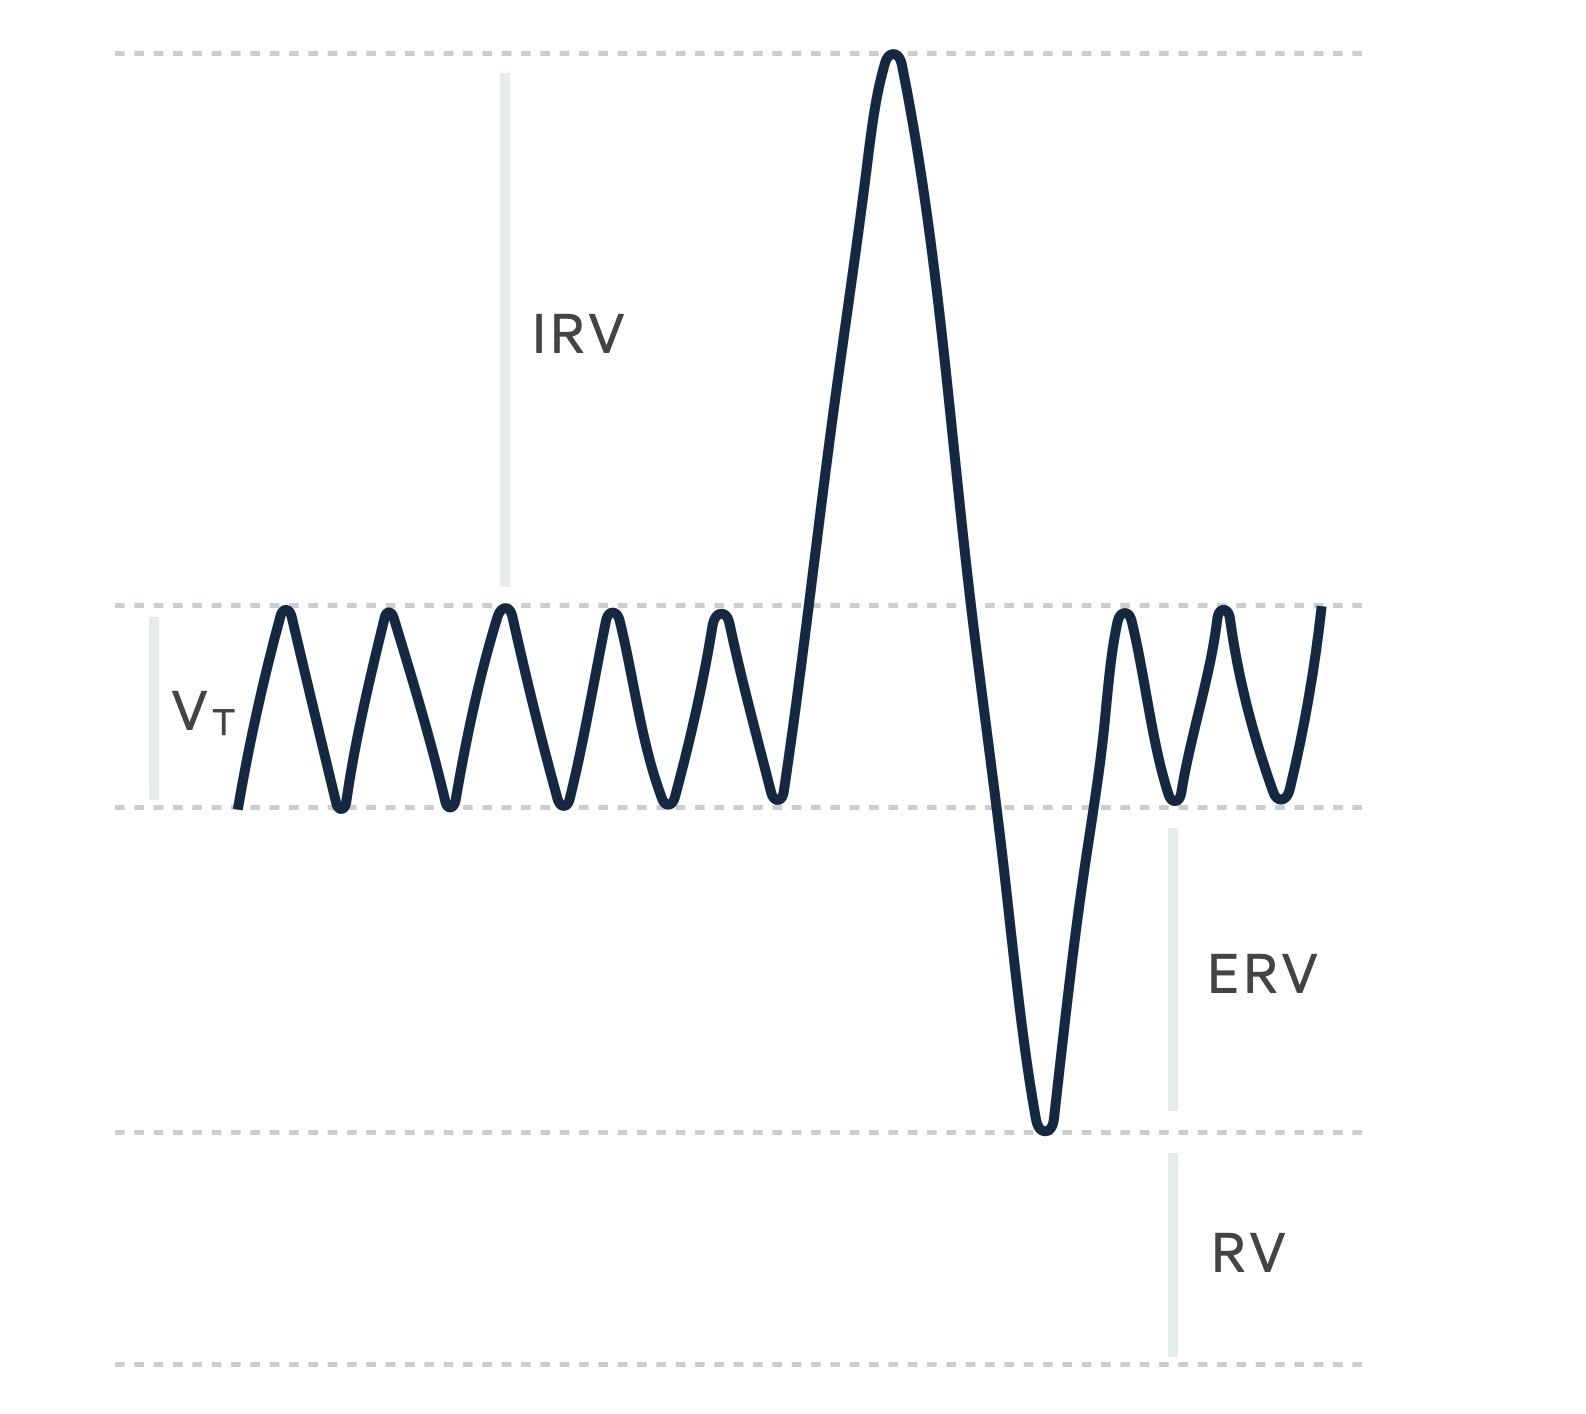 Lung volumes